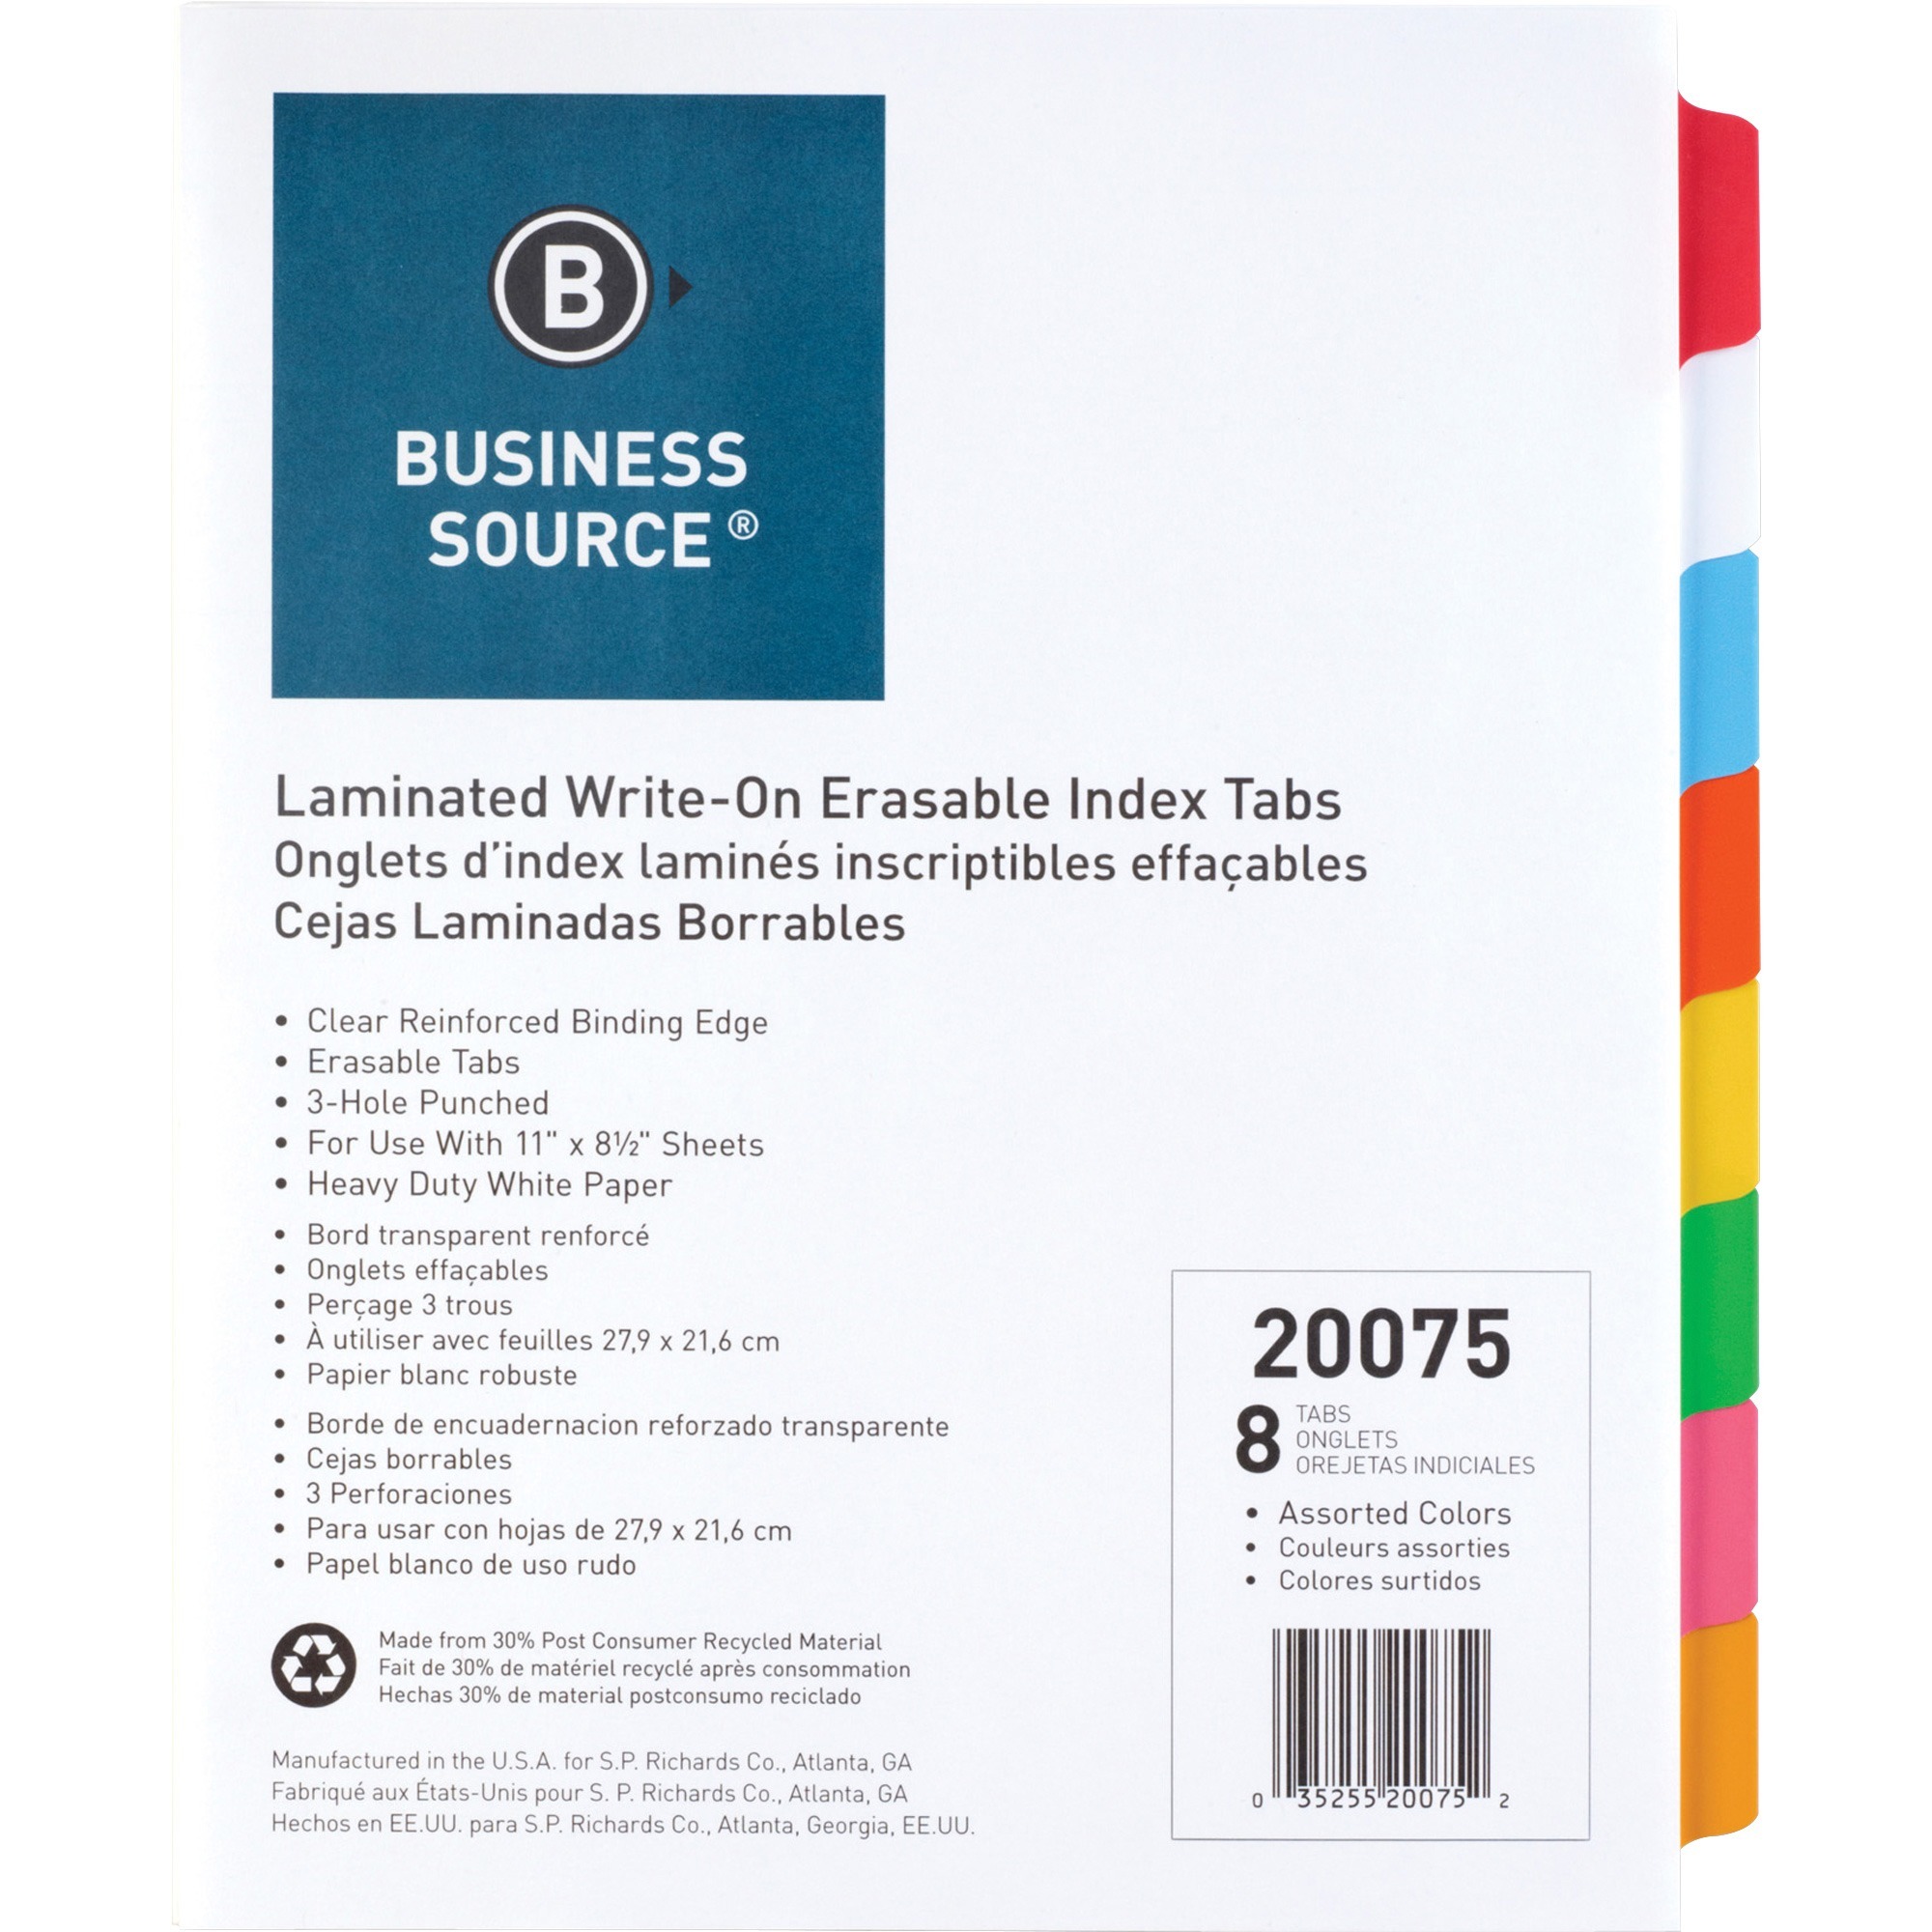 Business Source Laminated Write-On Tab Indexes - Each